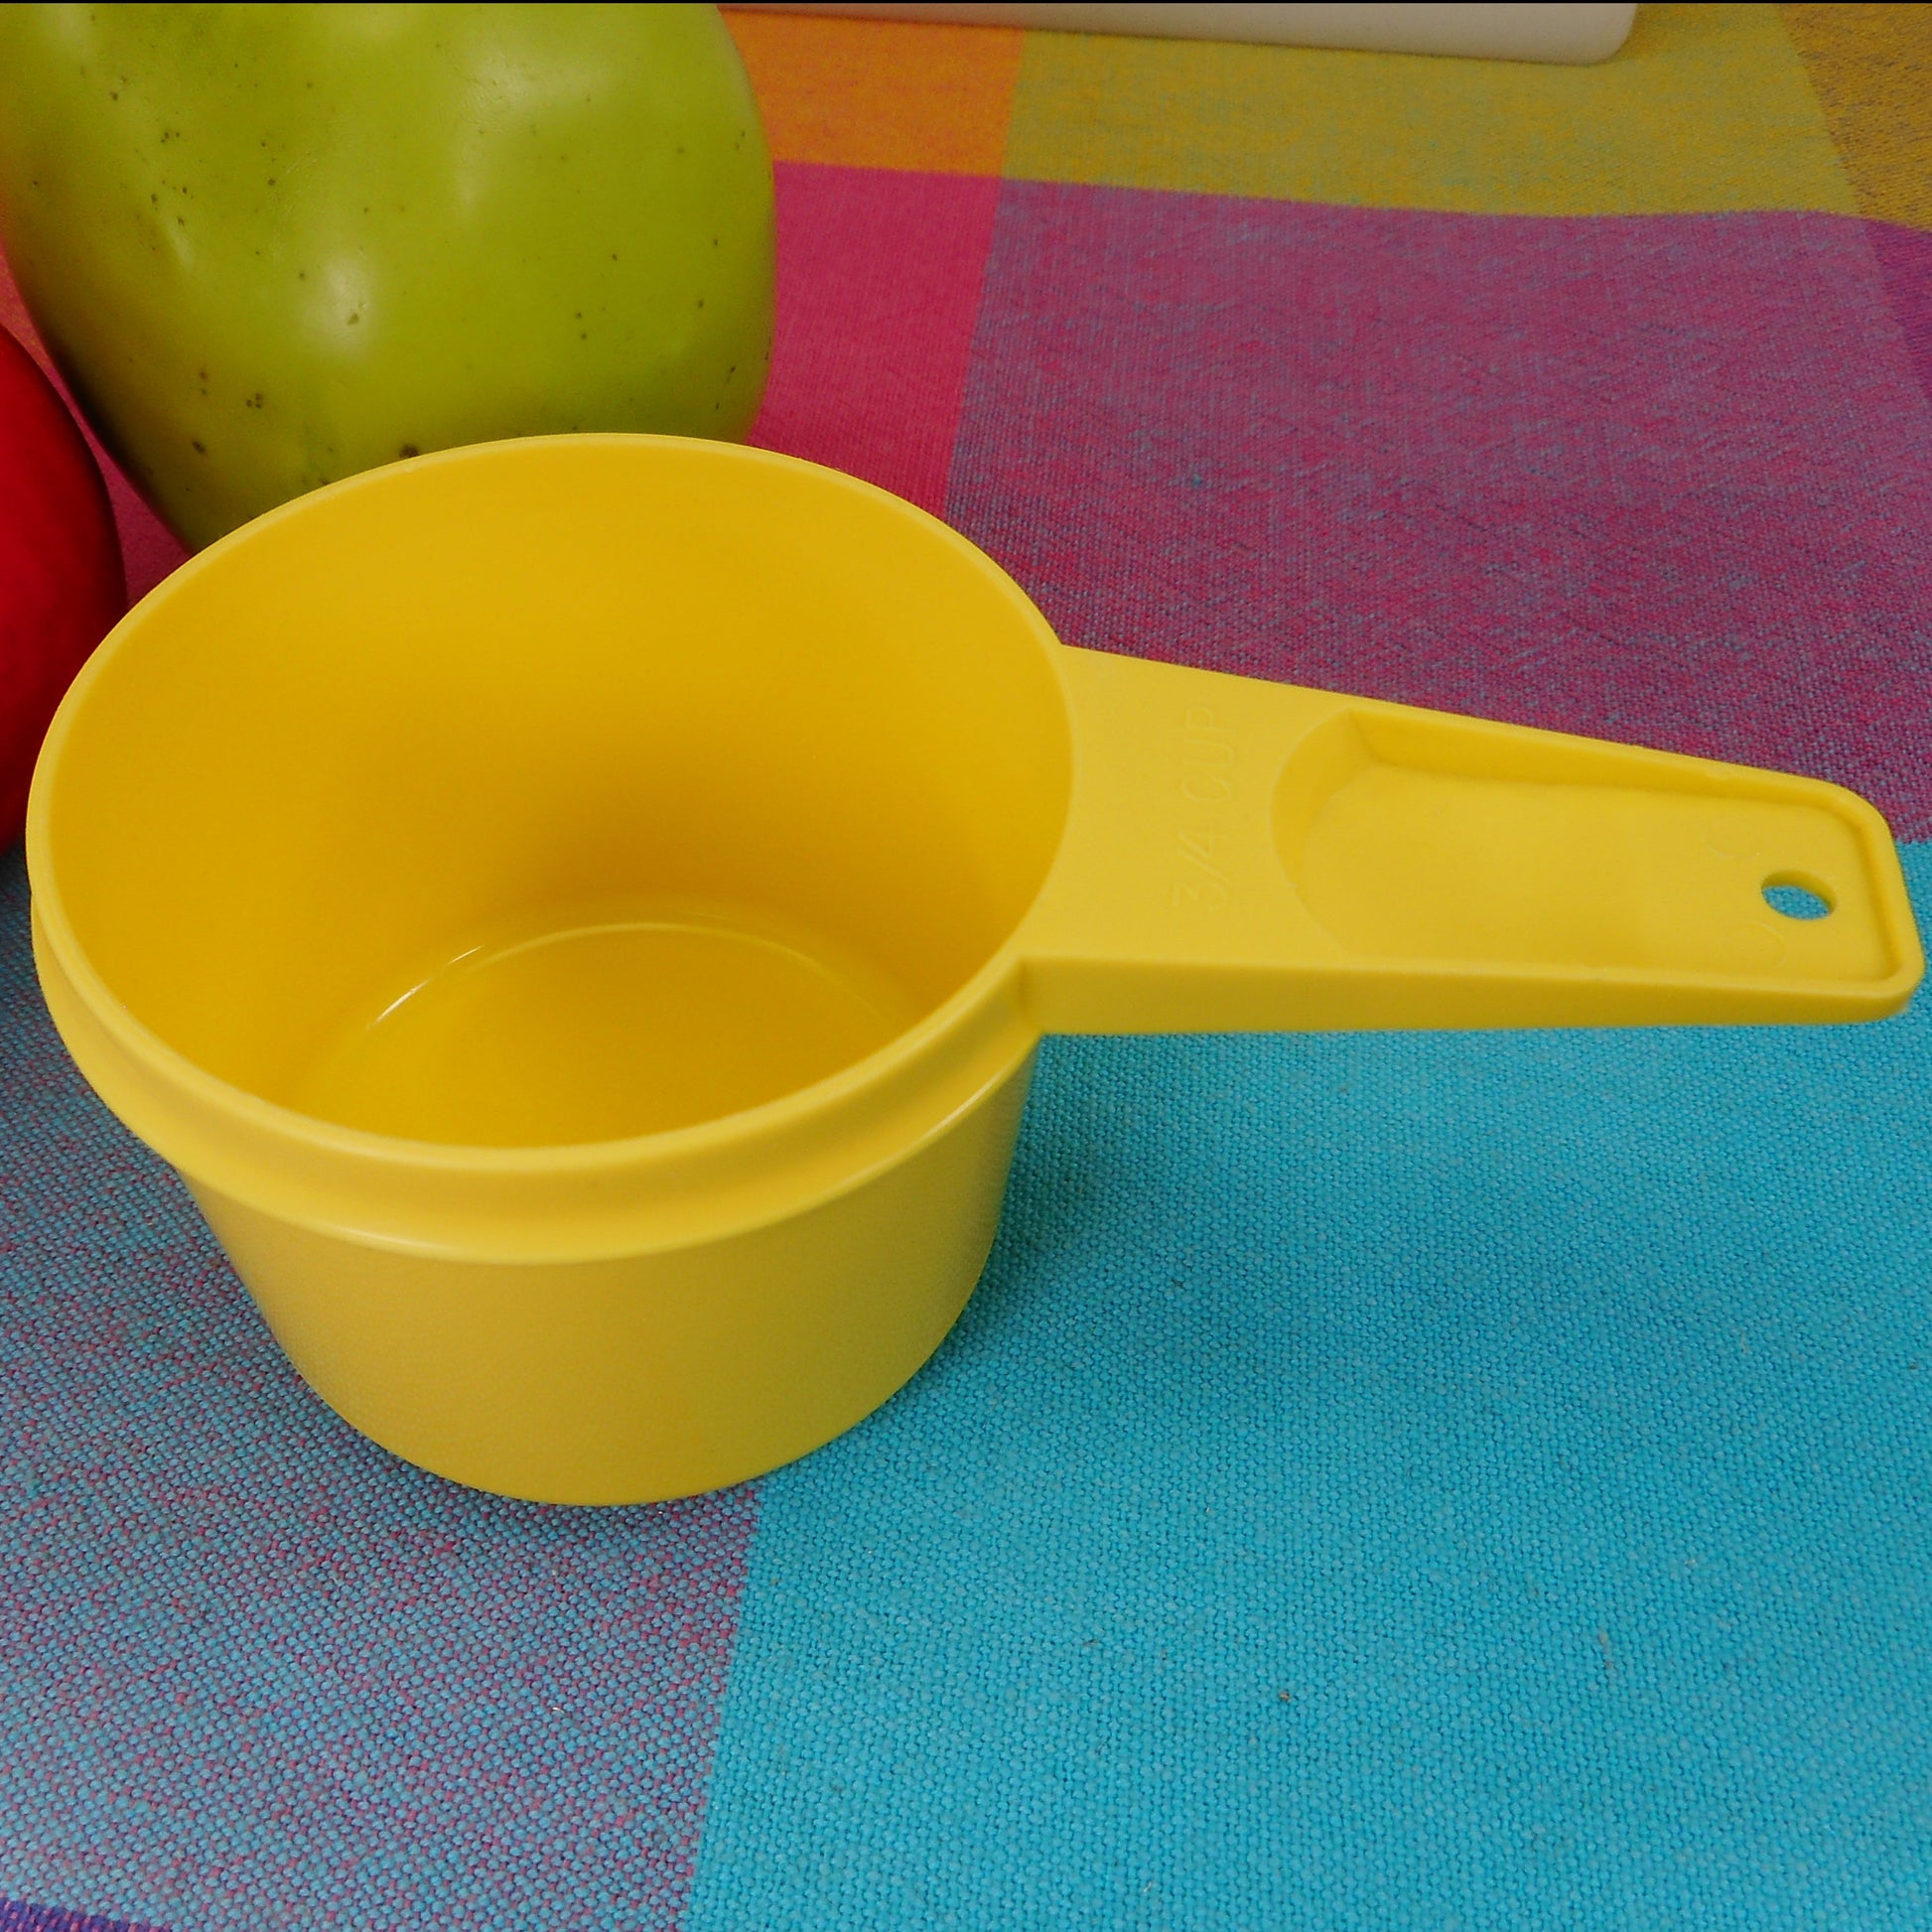 Tupperware Bright Yellow Measuring Cup - 3/4 Cup Replacement